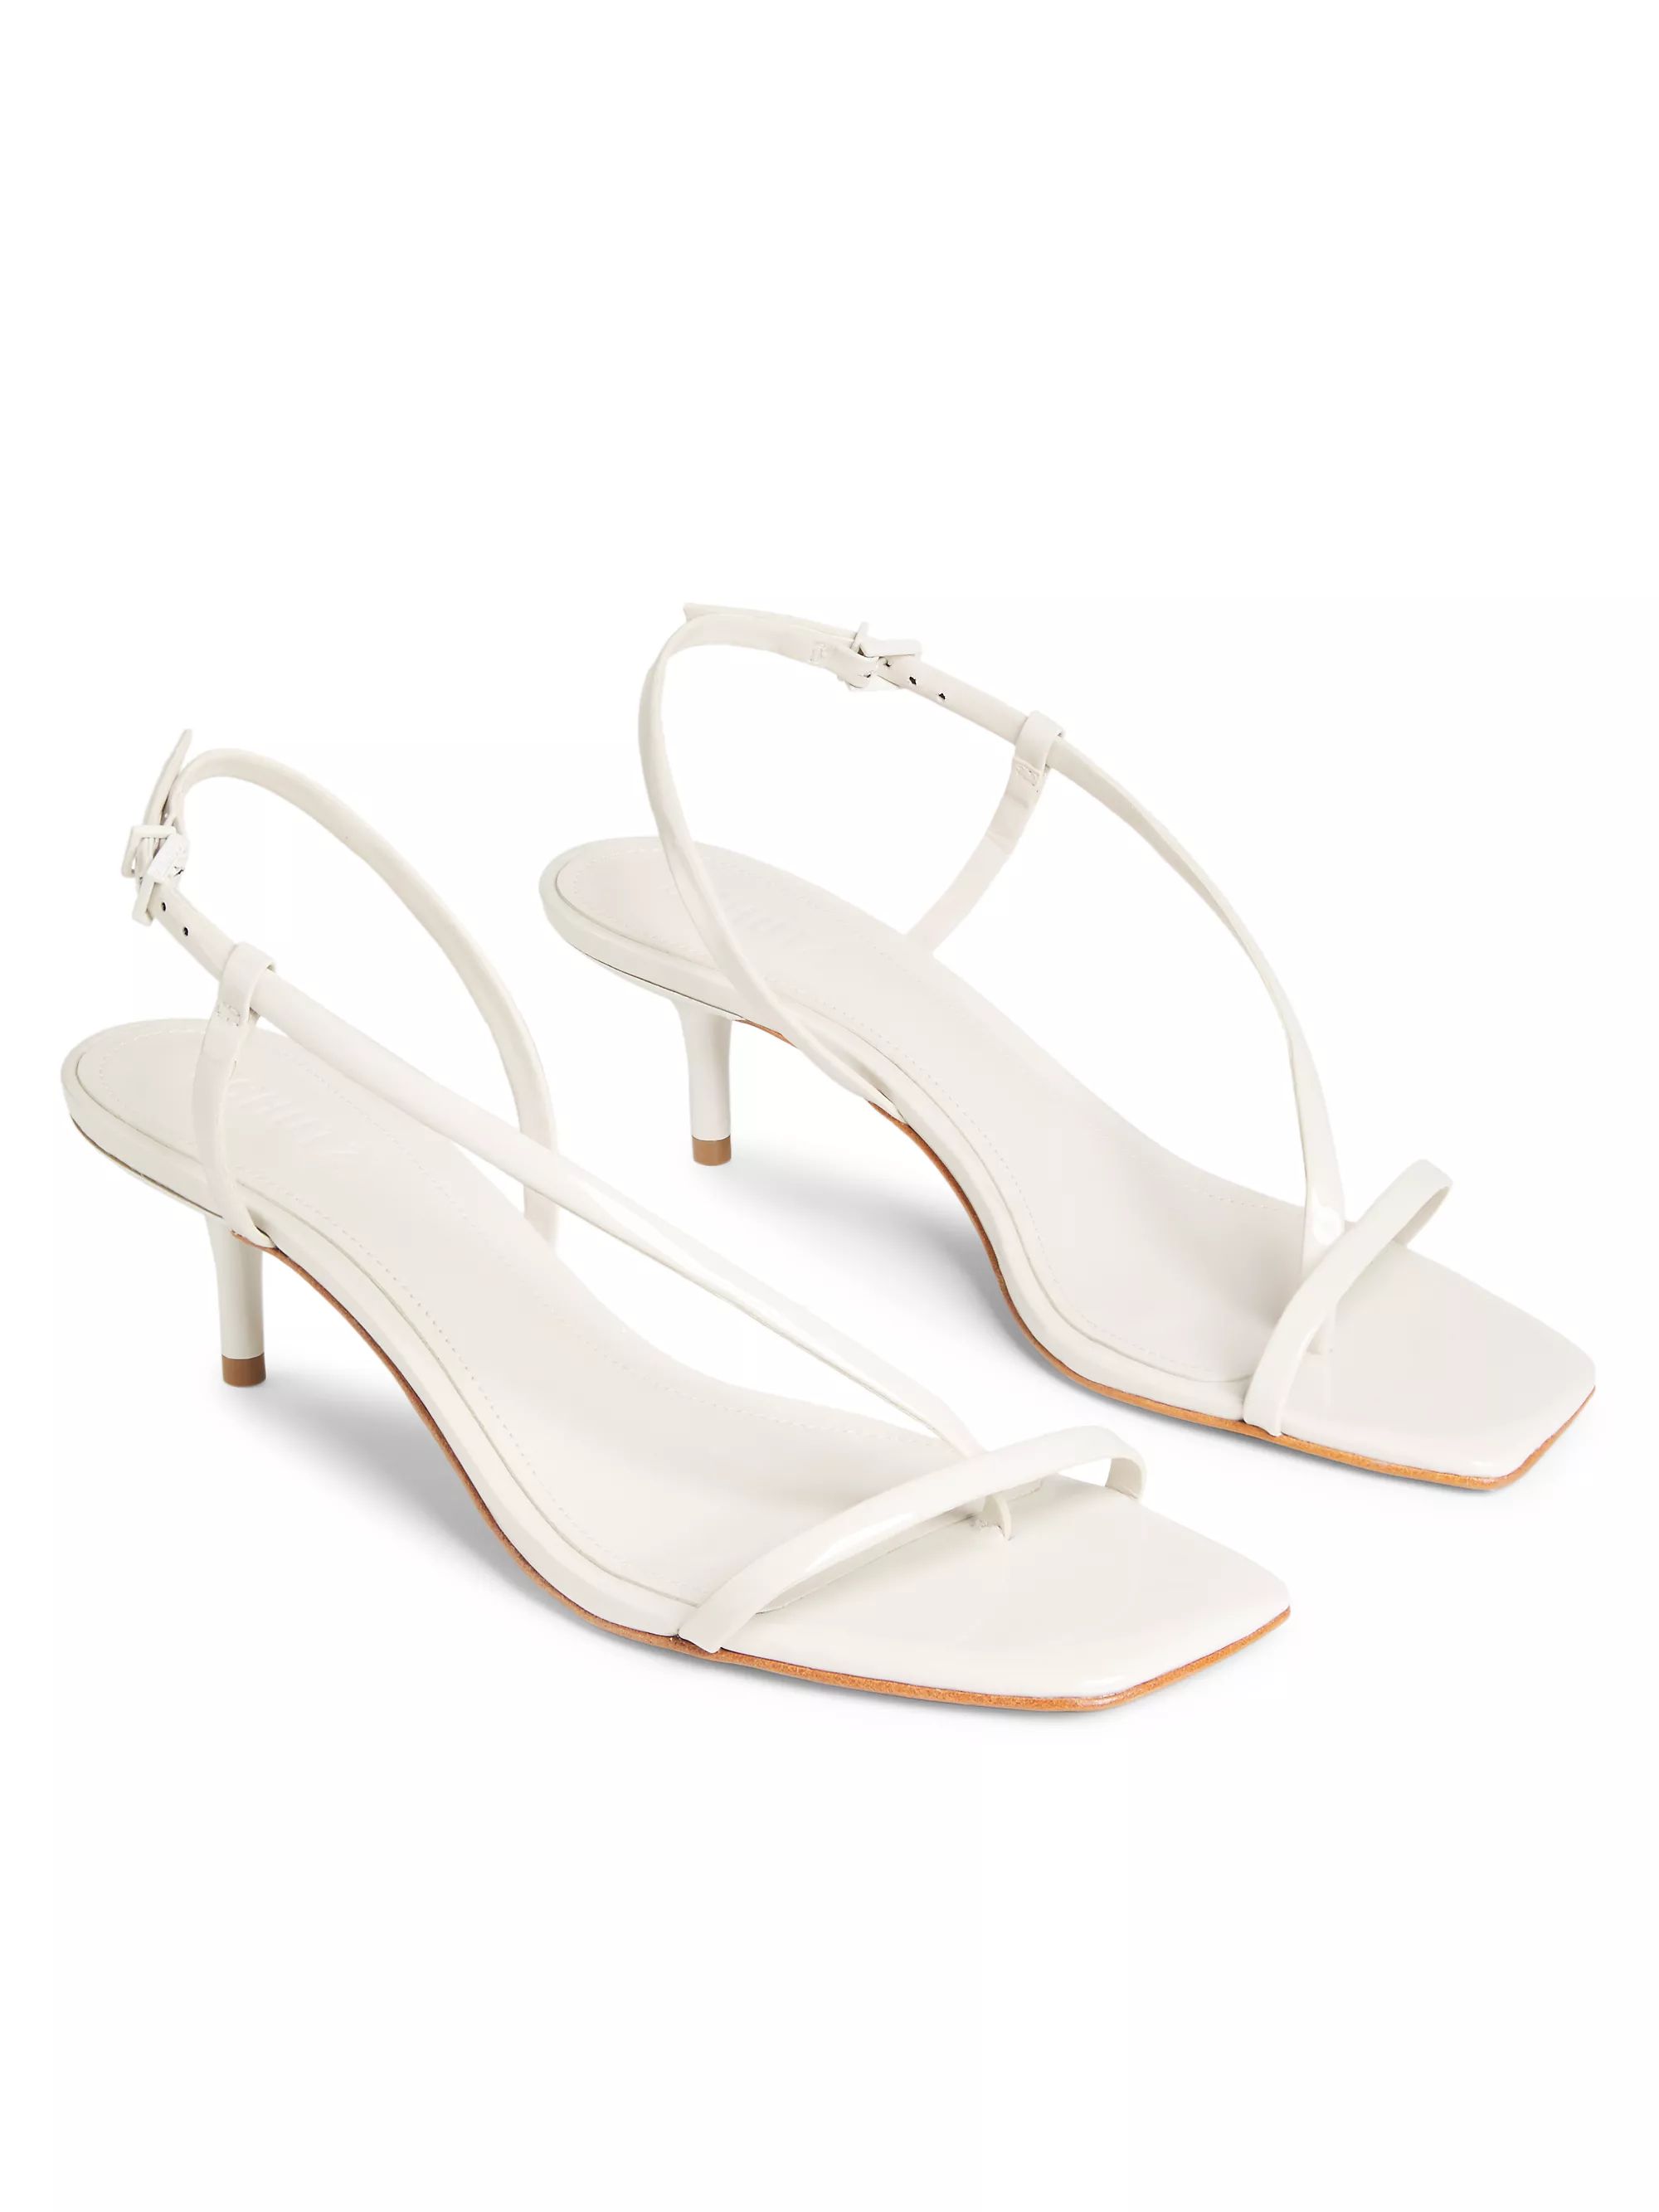 Heloise 63MM Patent Leather Slingback Sandals | Saks Fifth Avenue